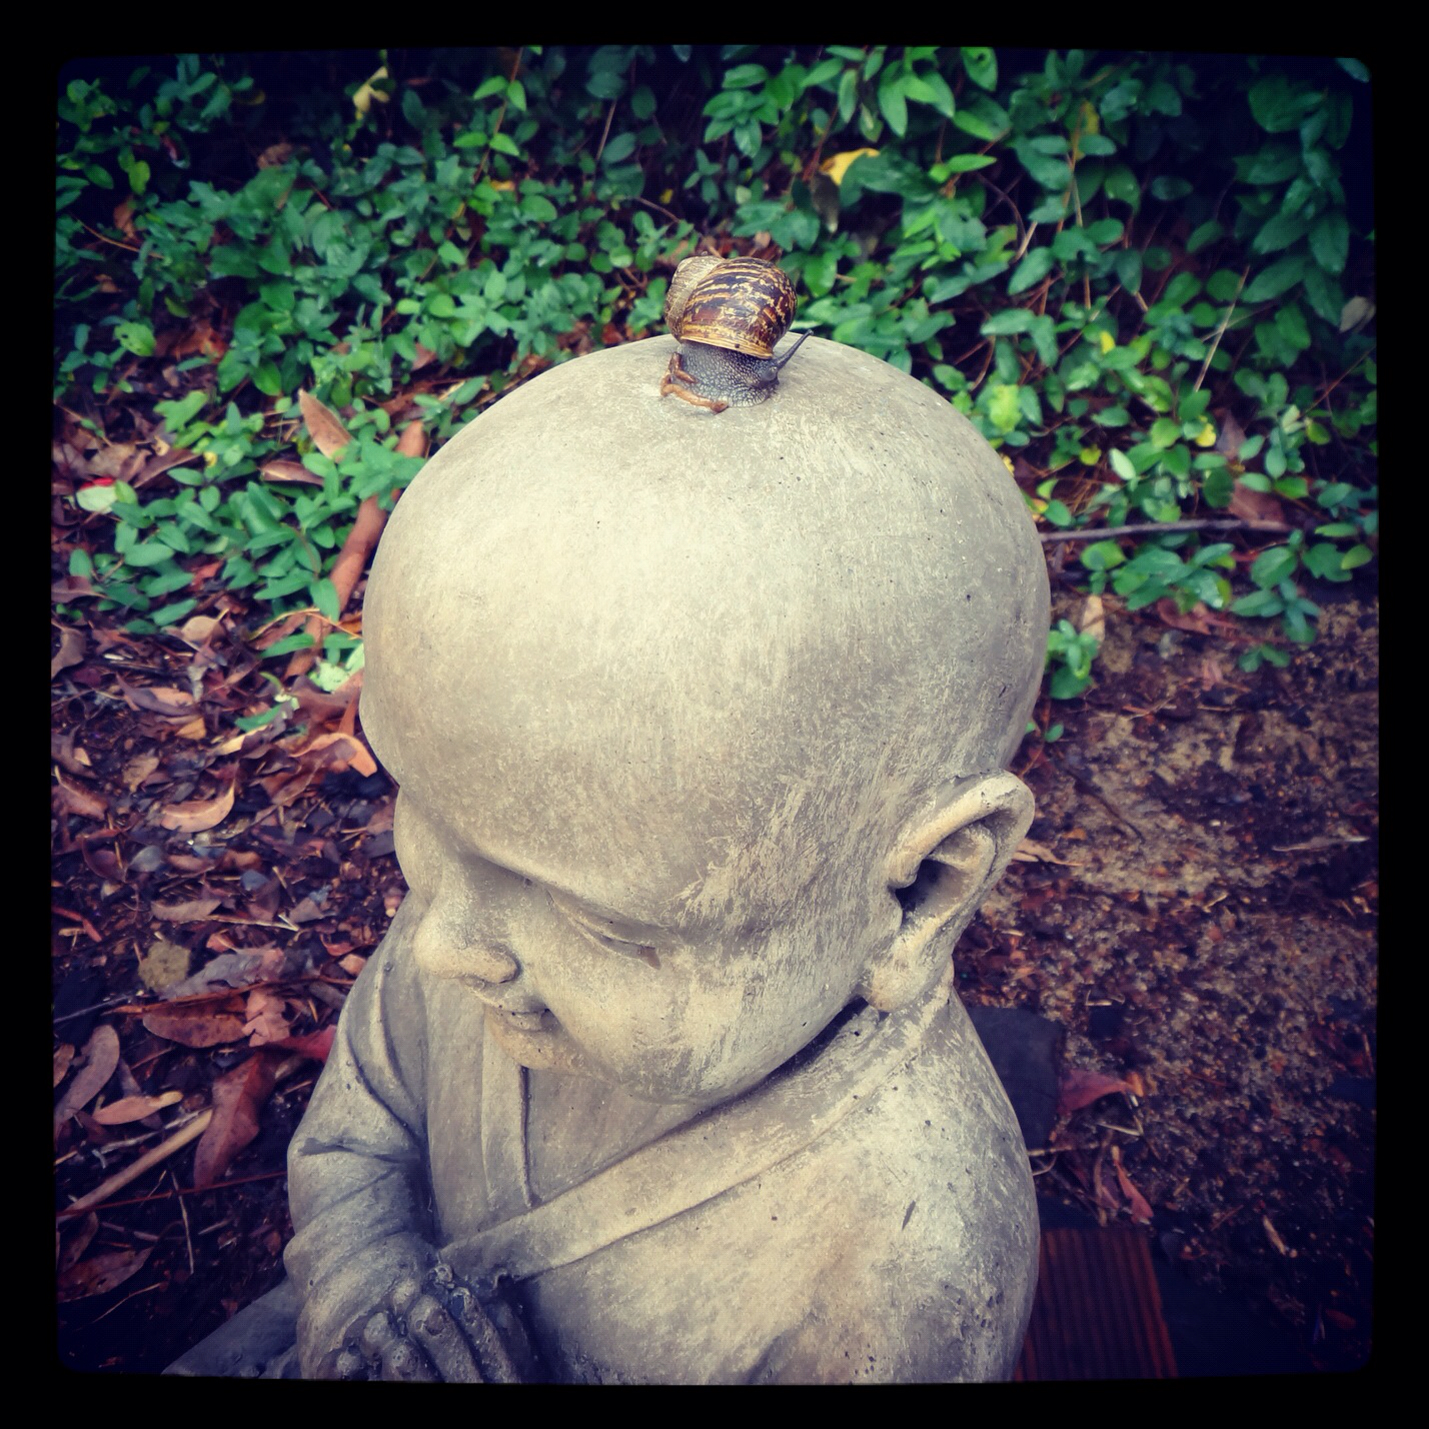 A snail looking down from atop the buddha's head! :)